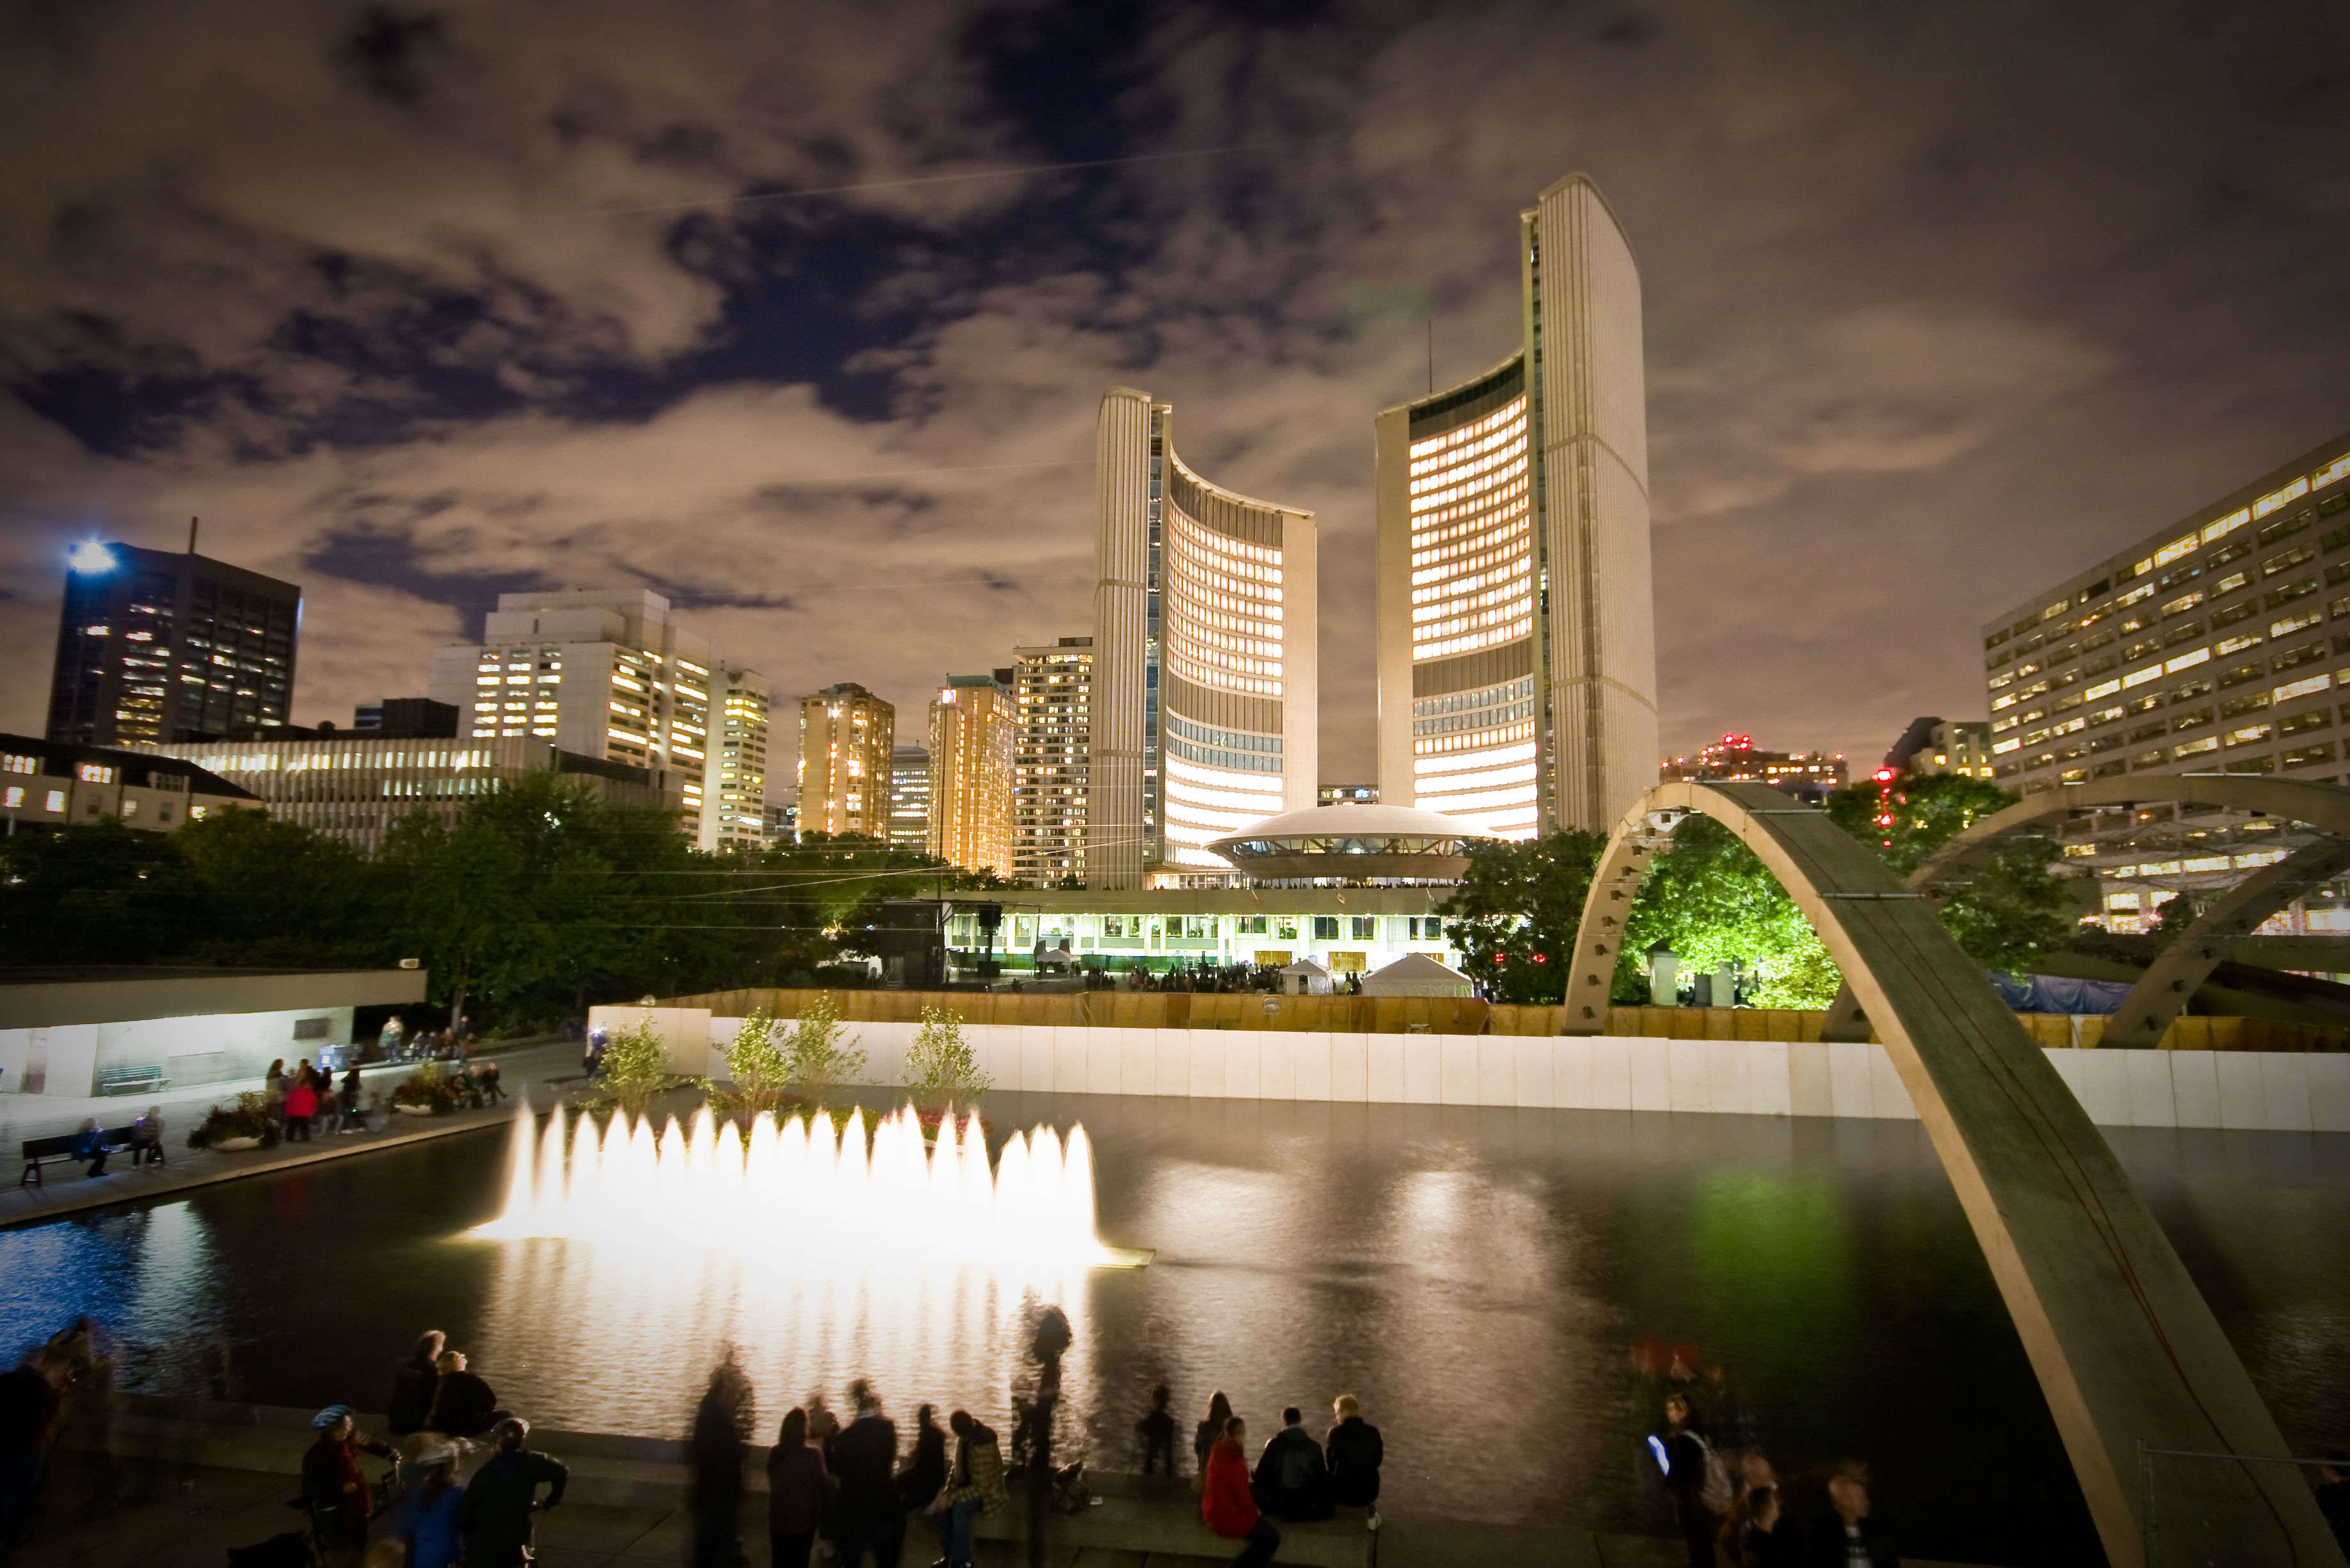 Sleepless in Toronto with the all-night Nuit Blanche art festival this September